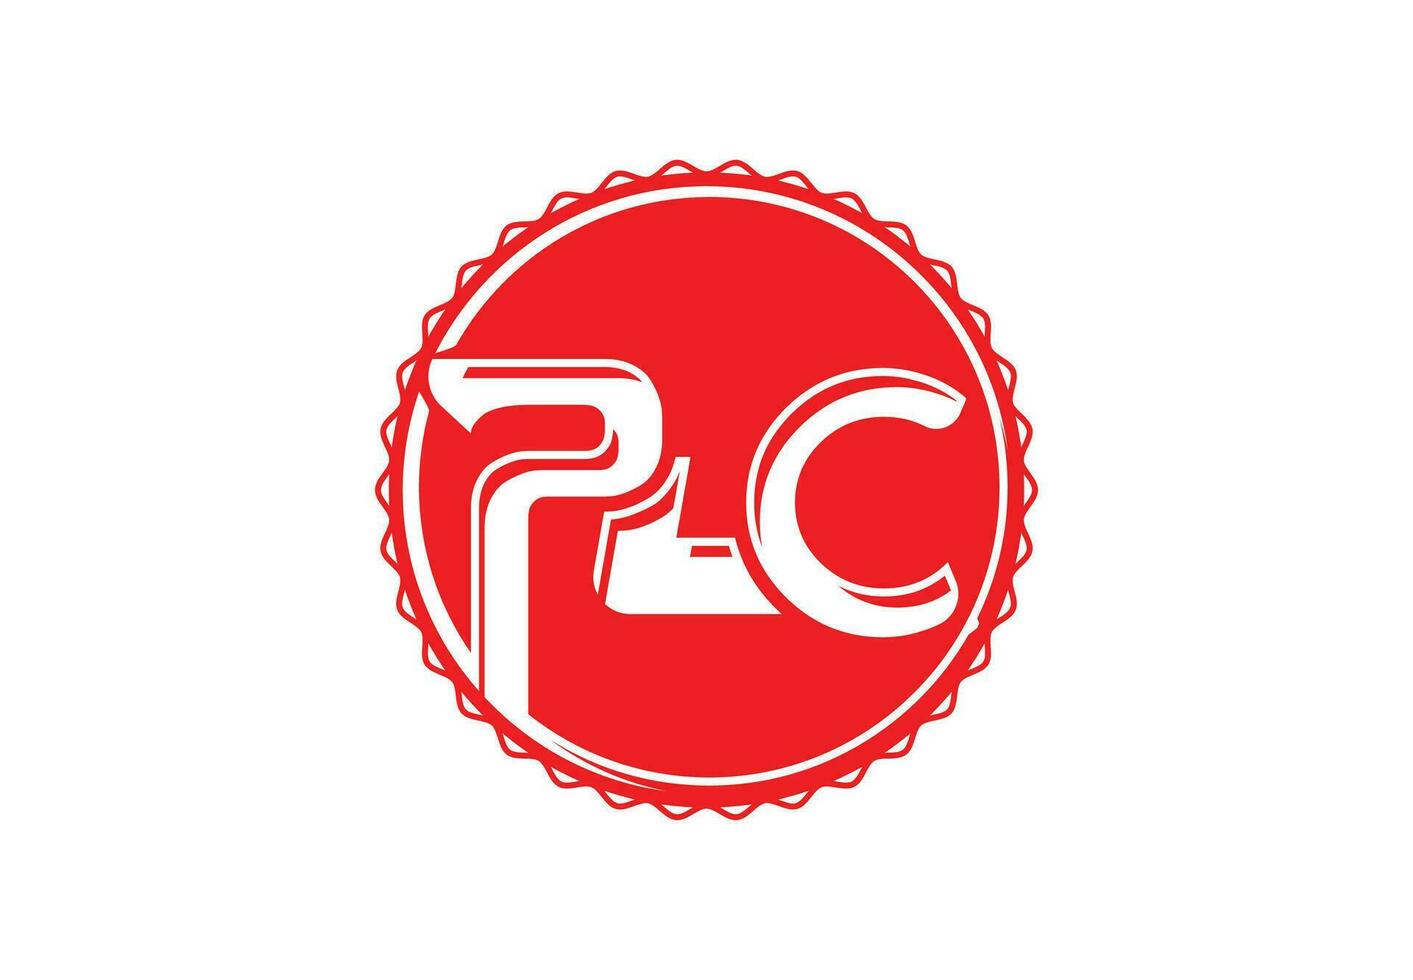 PLC letter logo and icon design template 2 vector